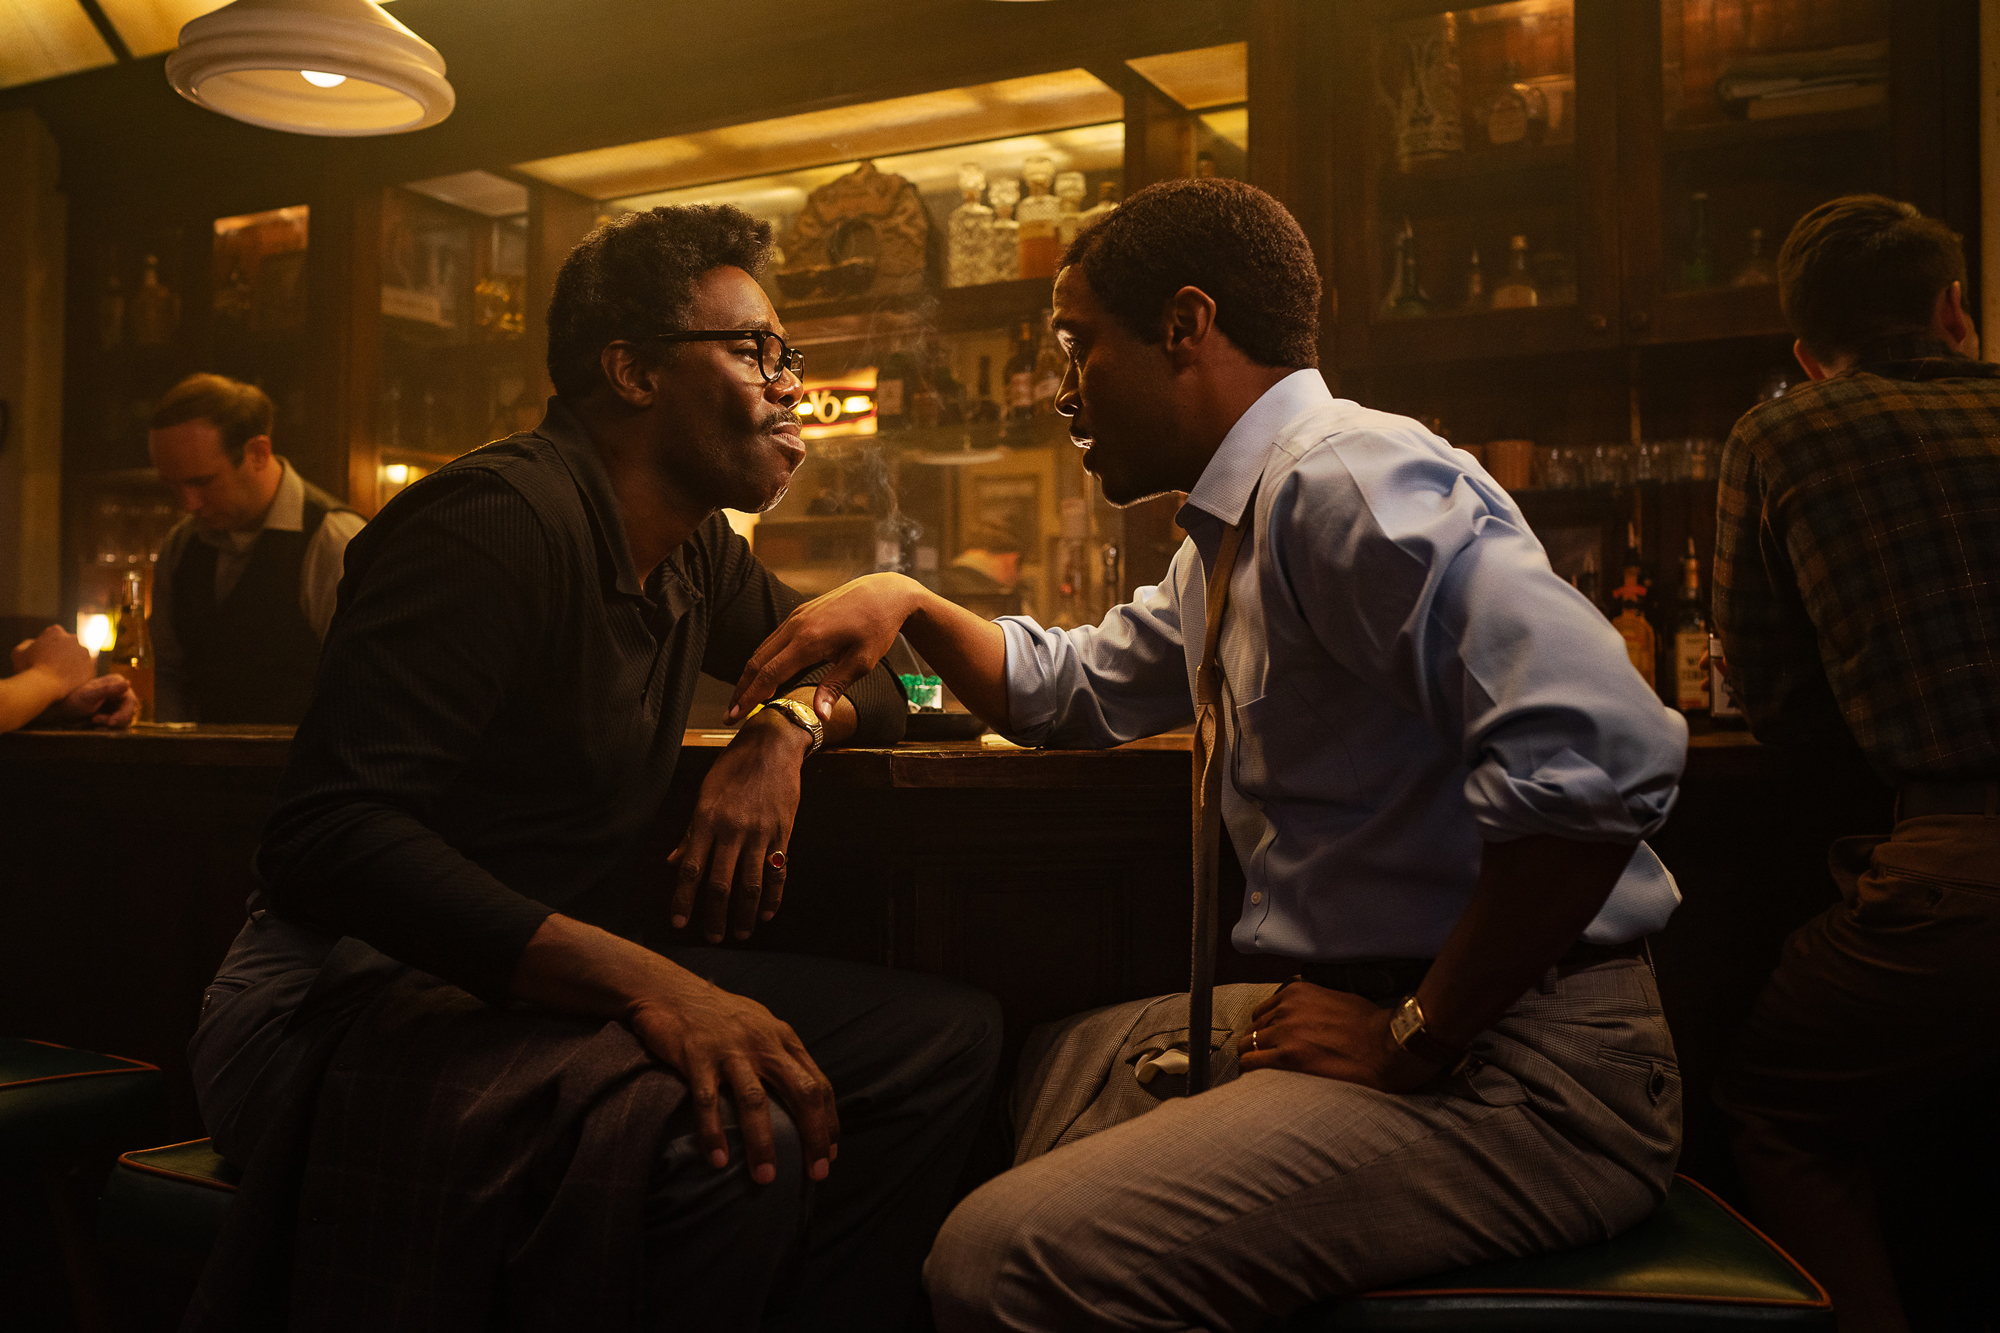 Two Black men lean towards each other while seated at bar